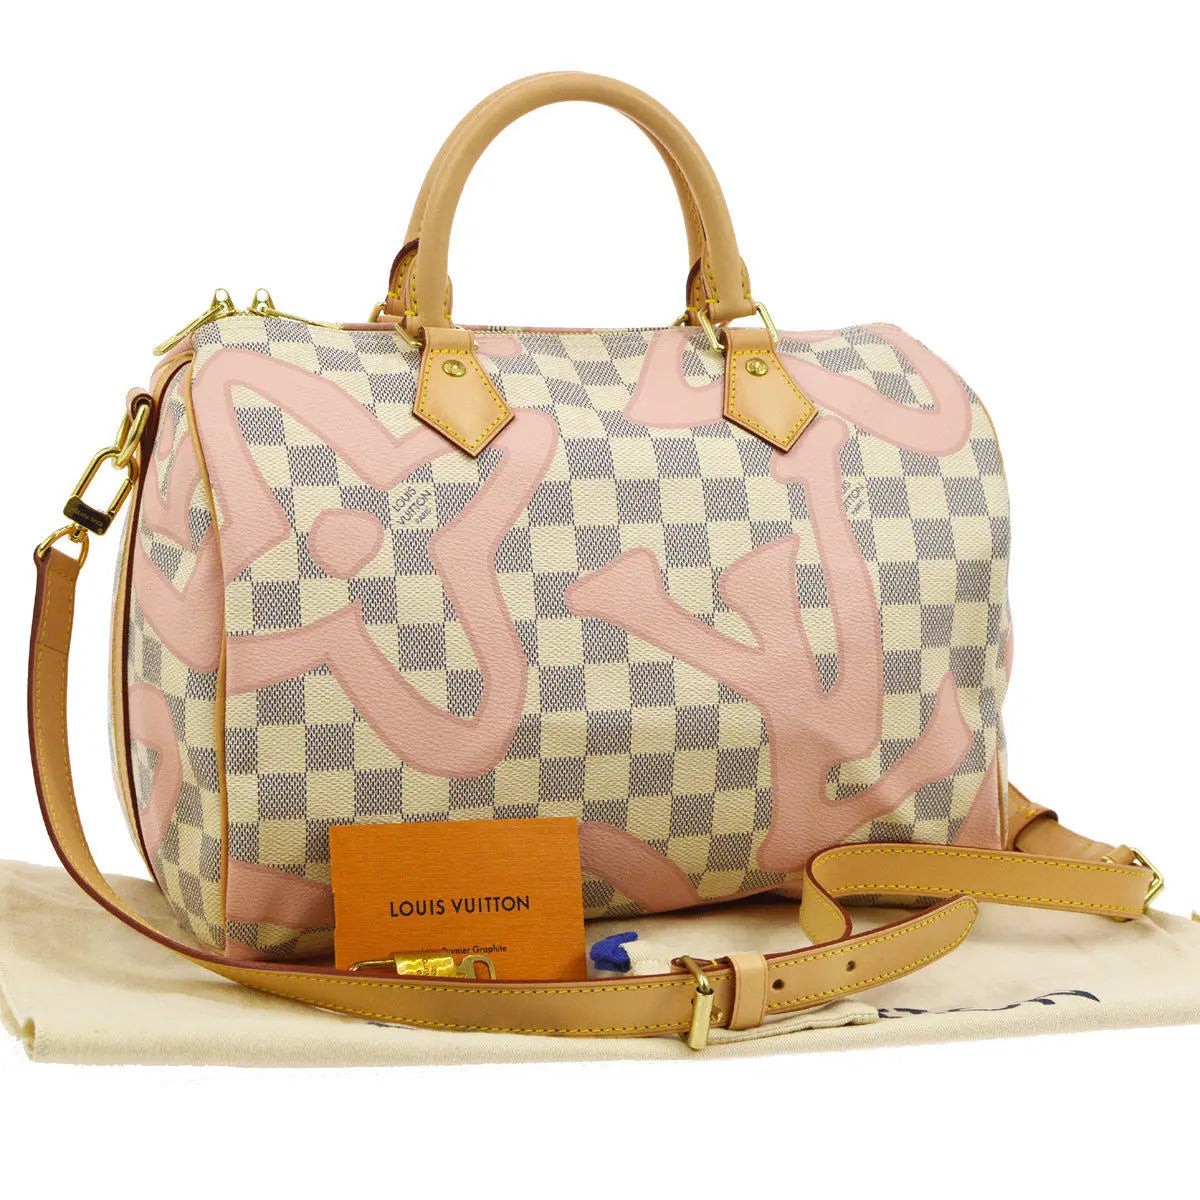 louisvuitton louis vuitton tahitienne speedy #outfit #outfit